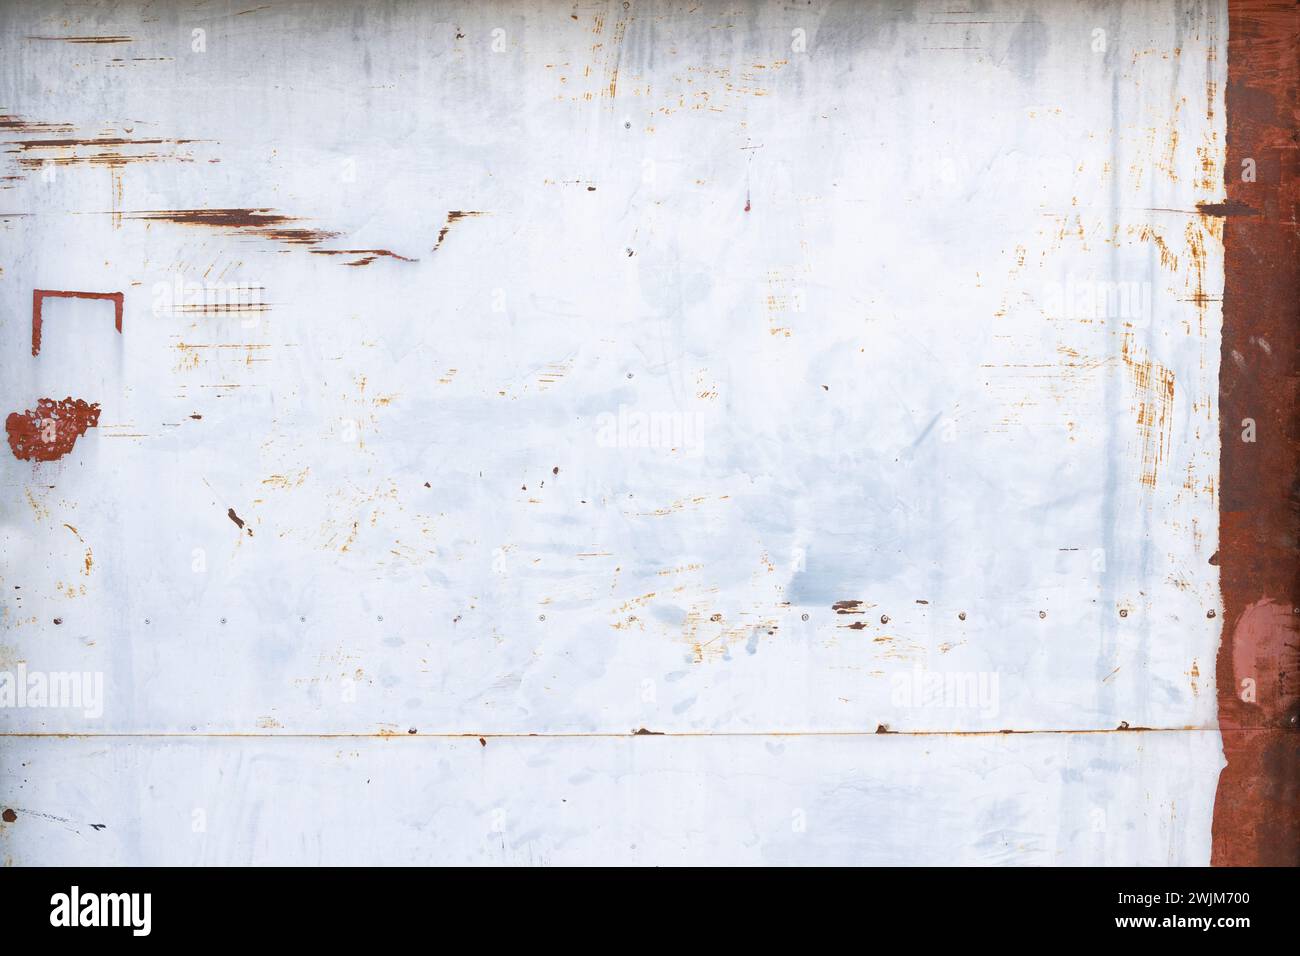 Rusty Metallic Surfaces, Perfect for Vintage and Industrial Designs Stock Photo